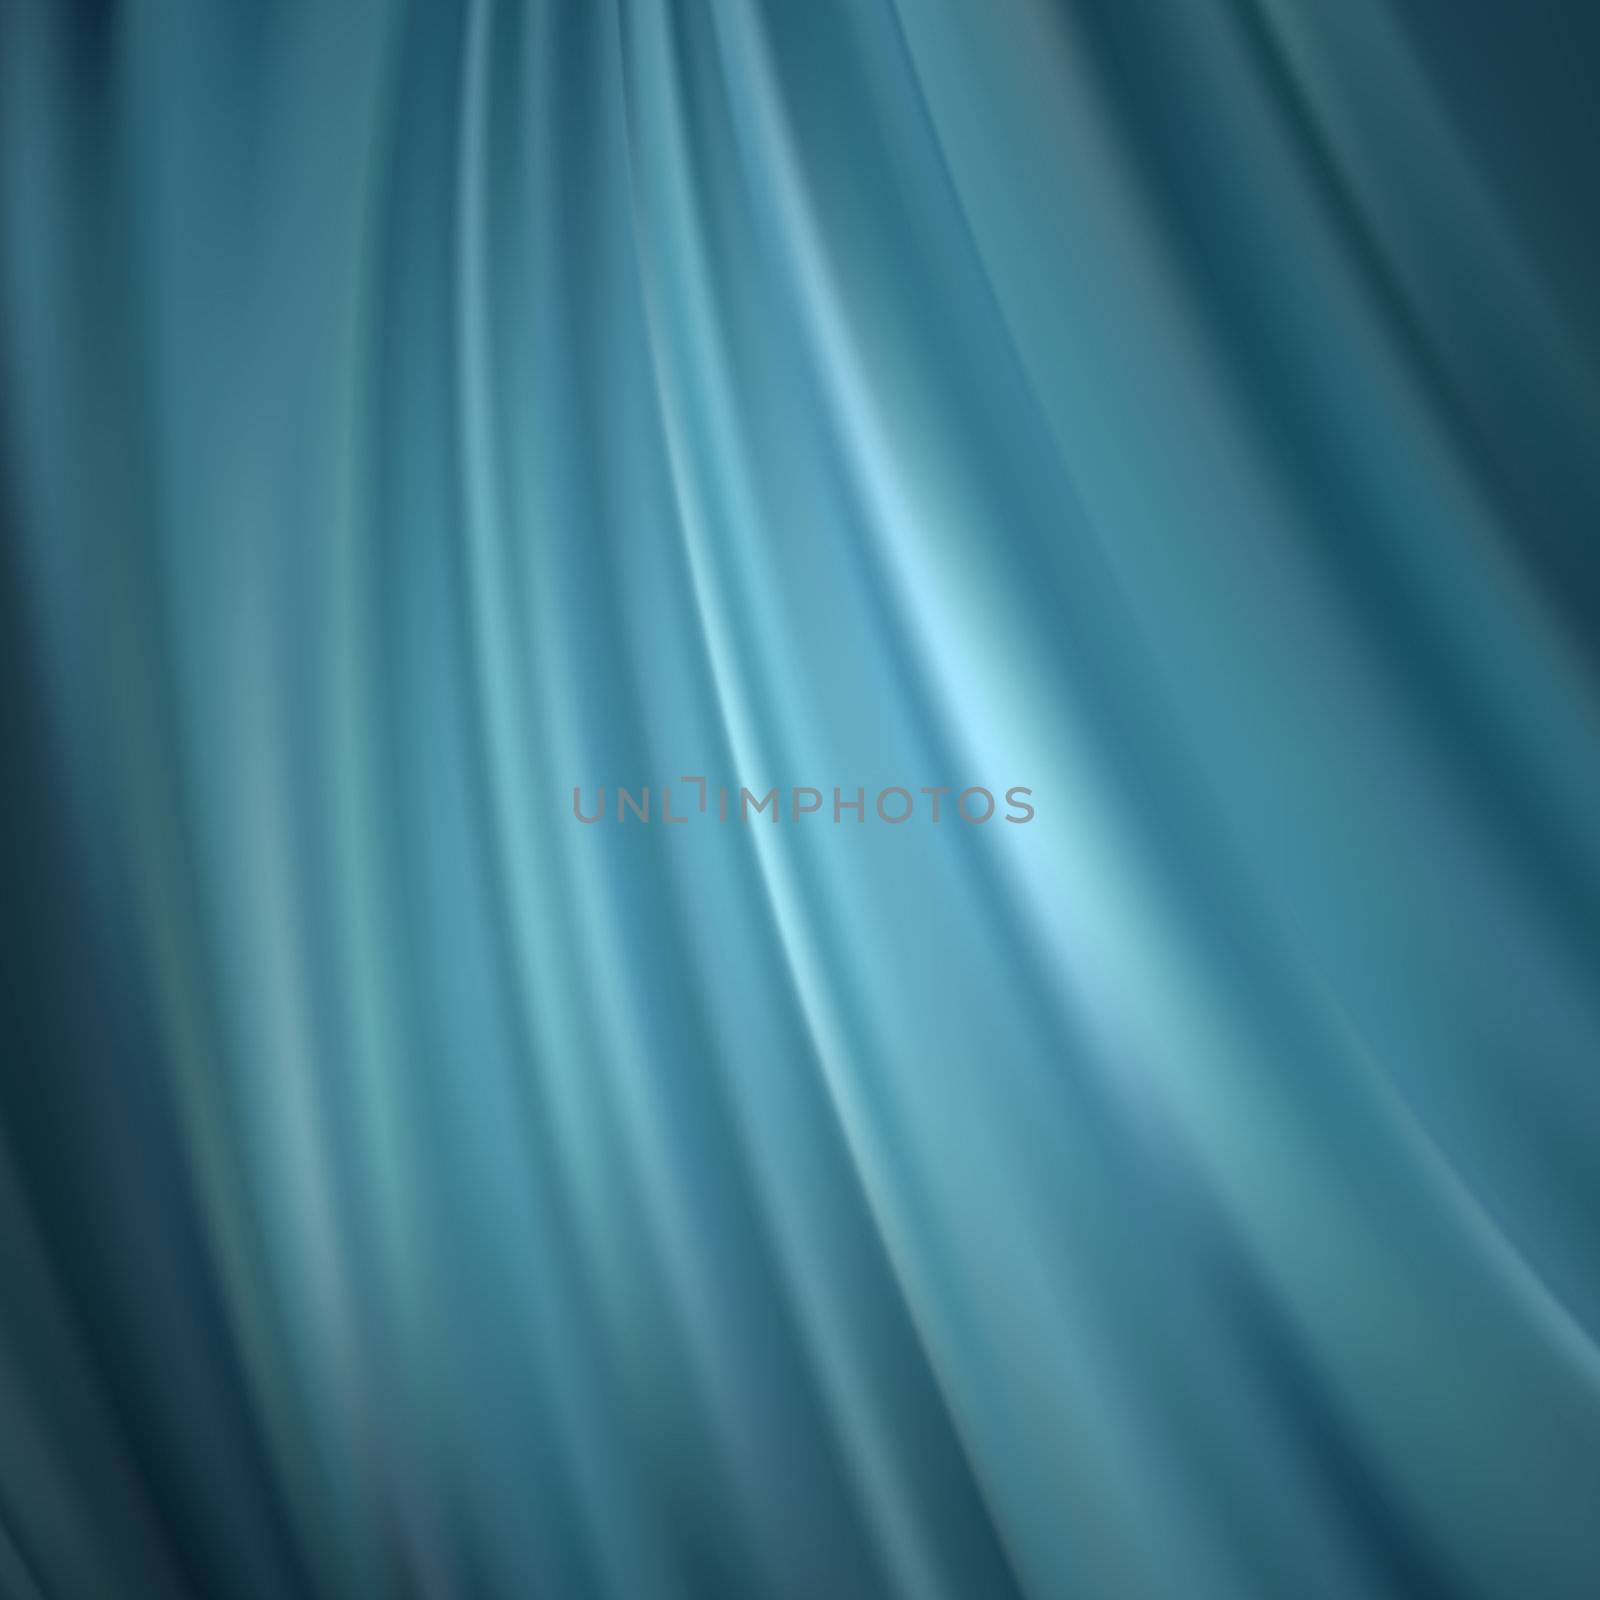 Beautiful Blue Satin. Drapery Abstract Background